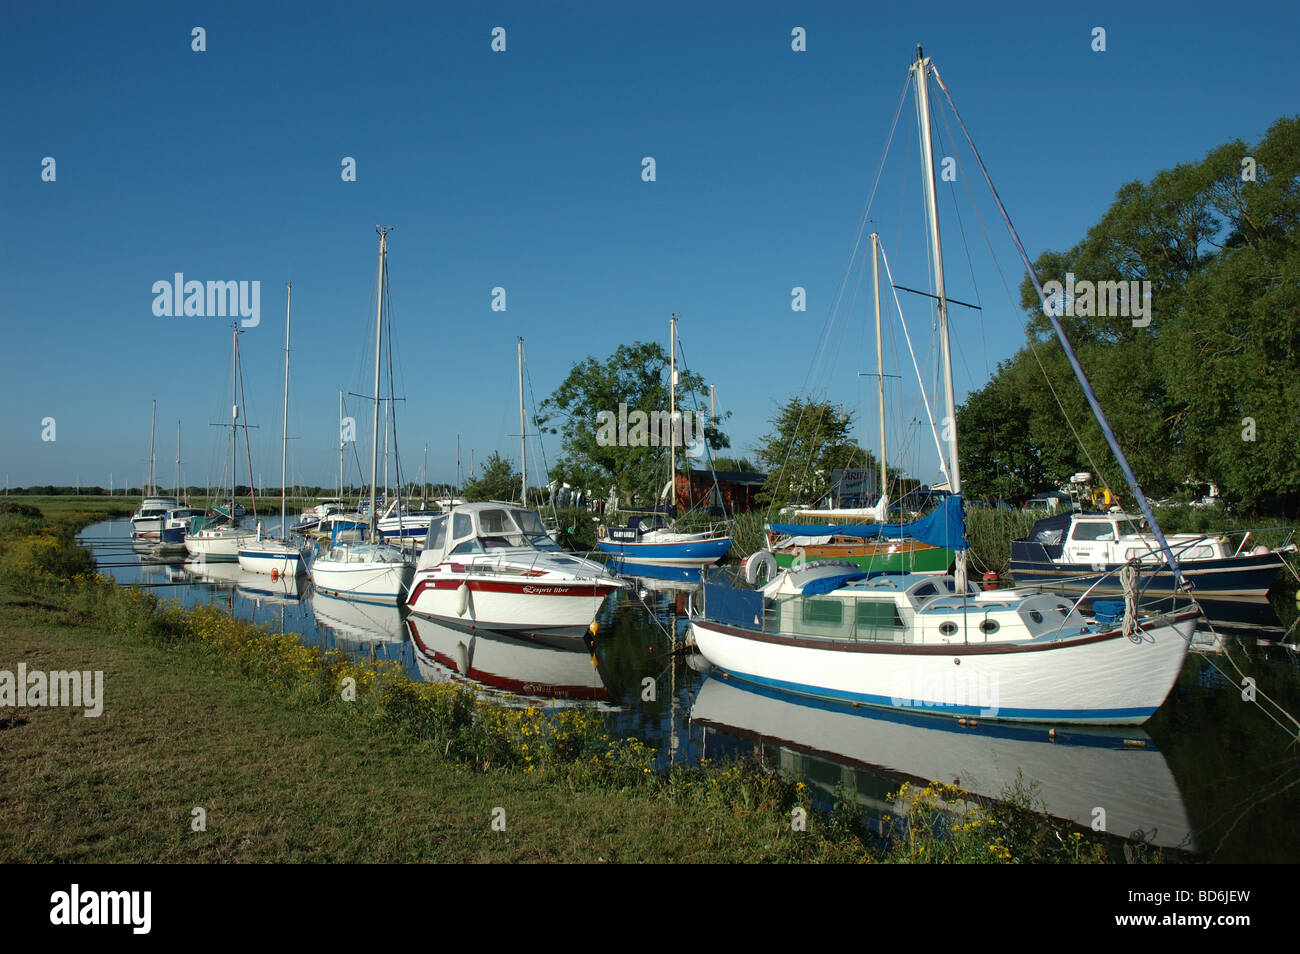 yachts moored on the River Avon, Christchurch, Dorset, England, UK Stock Photo